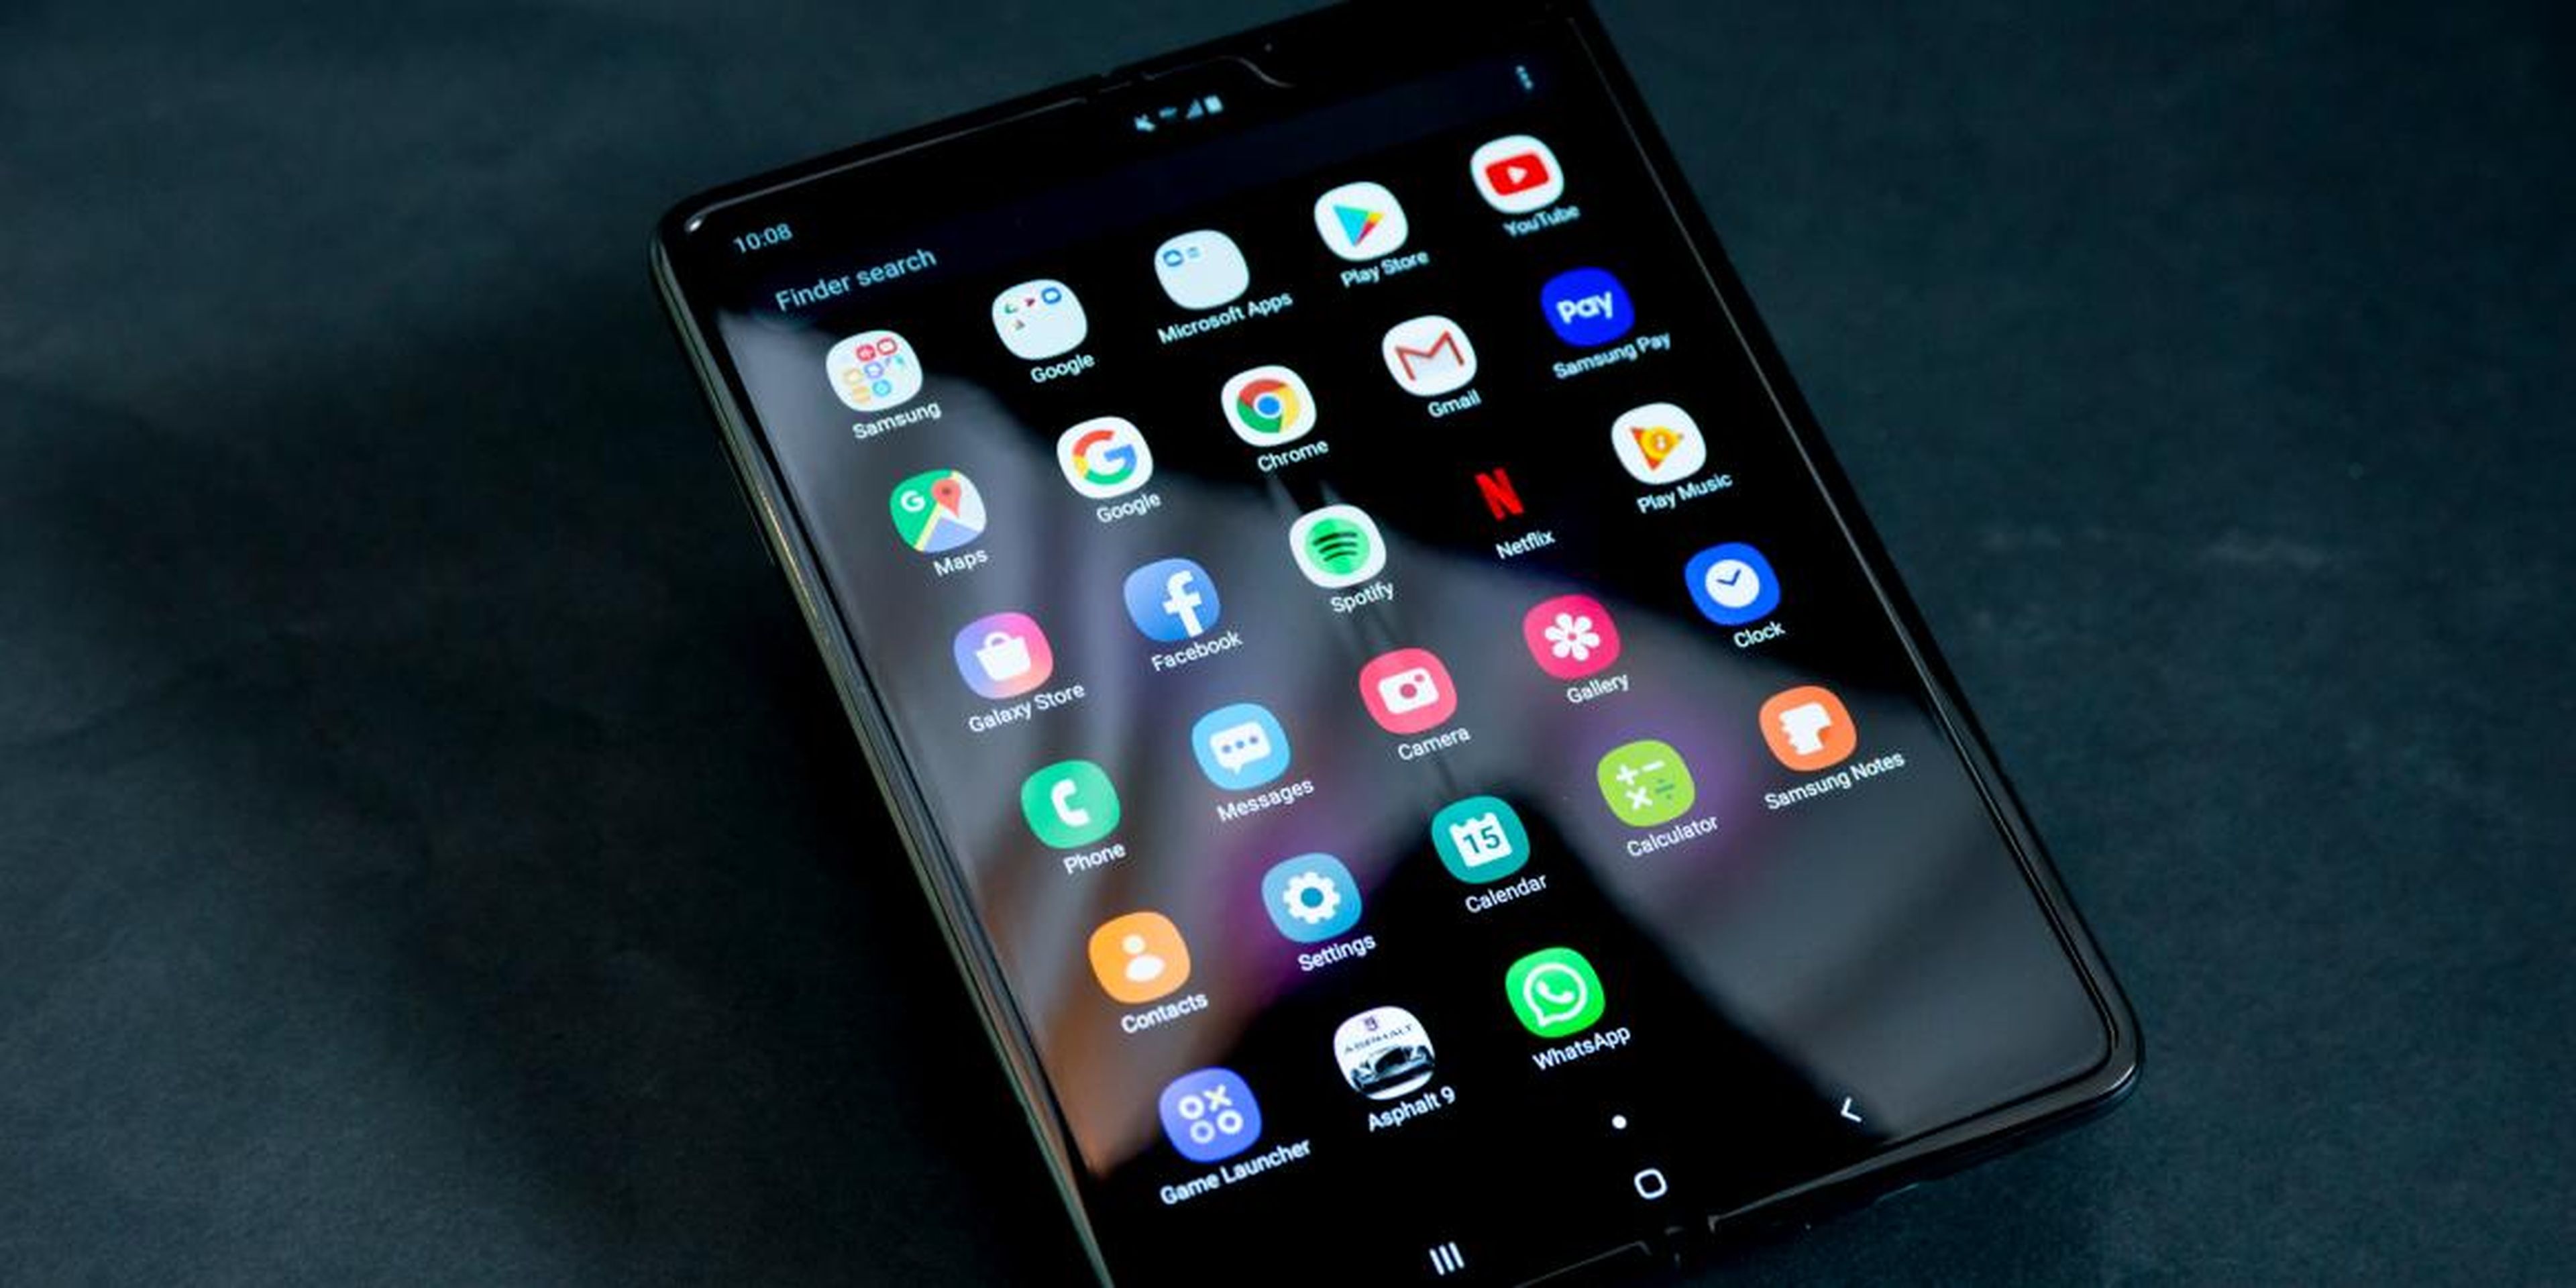 Some reviewers say their $2,000 Samsung Galaxy Fold foldable smartphones are breaking after just two days of use